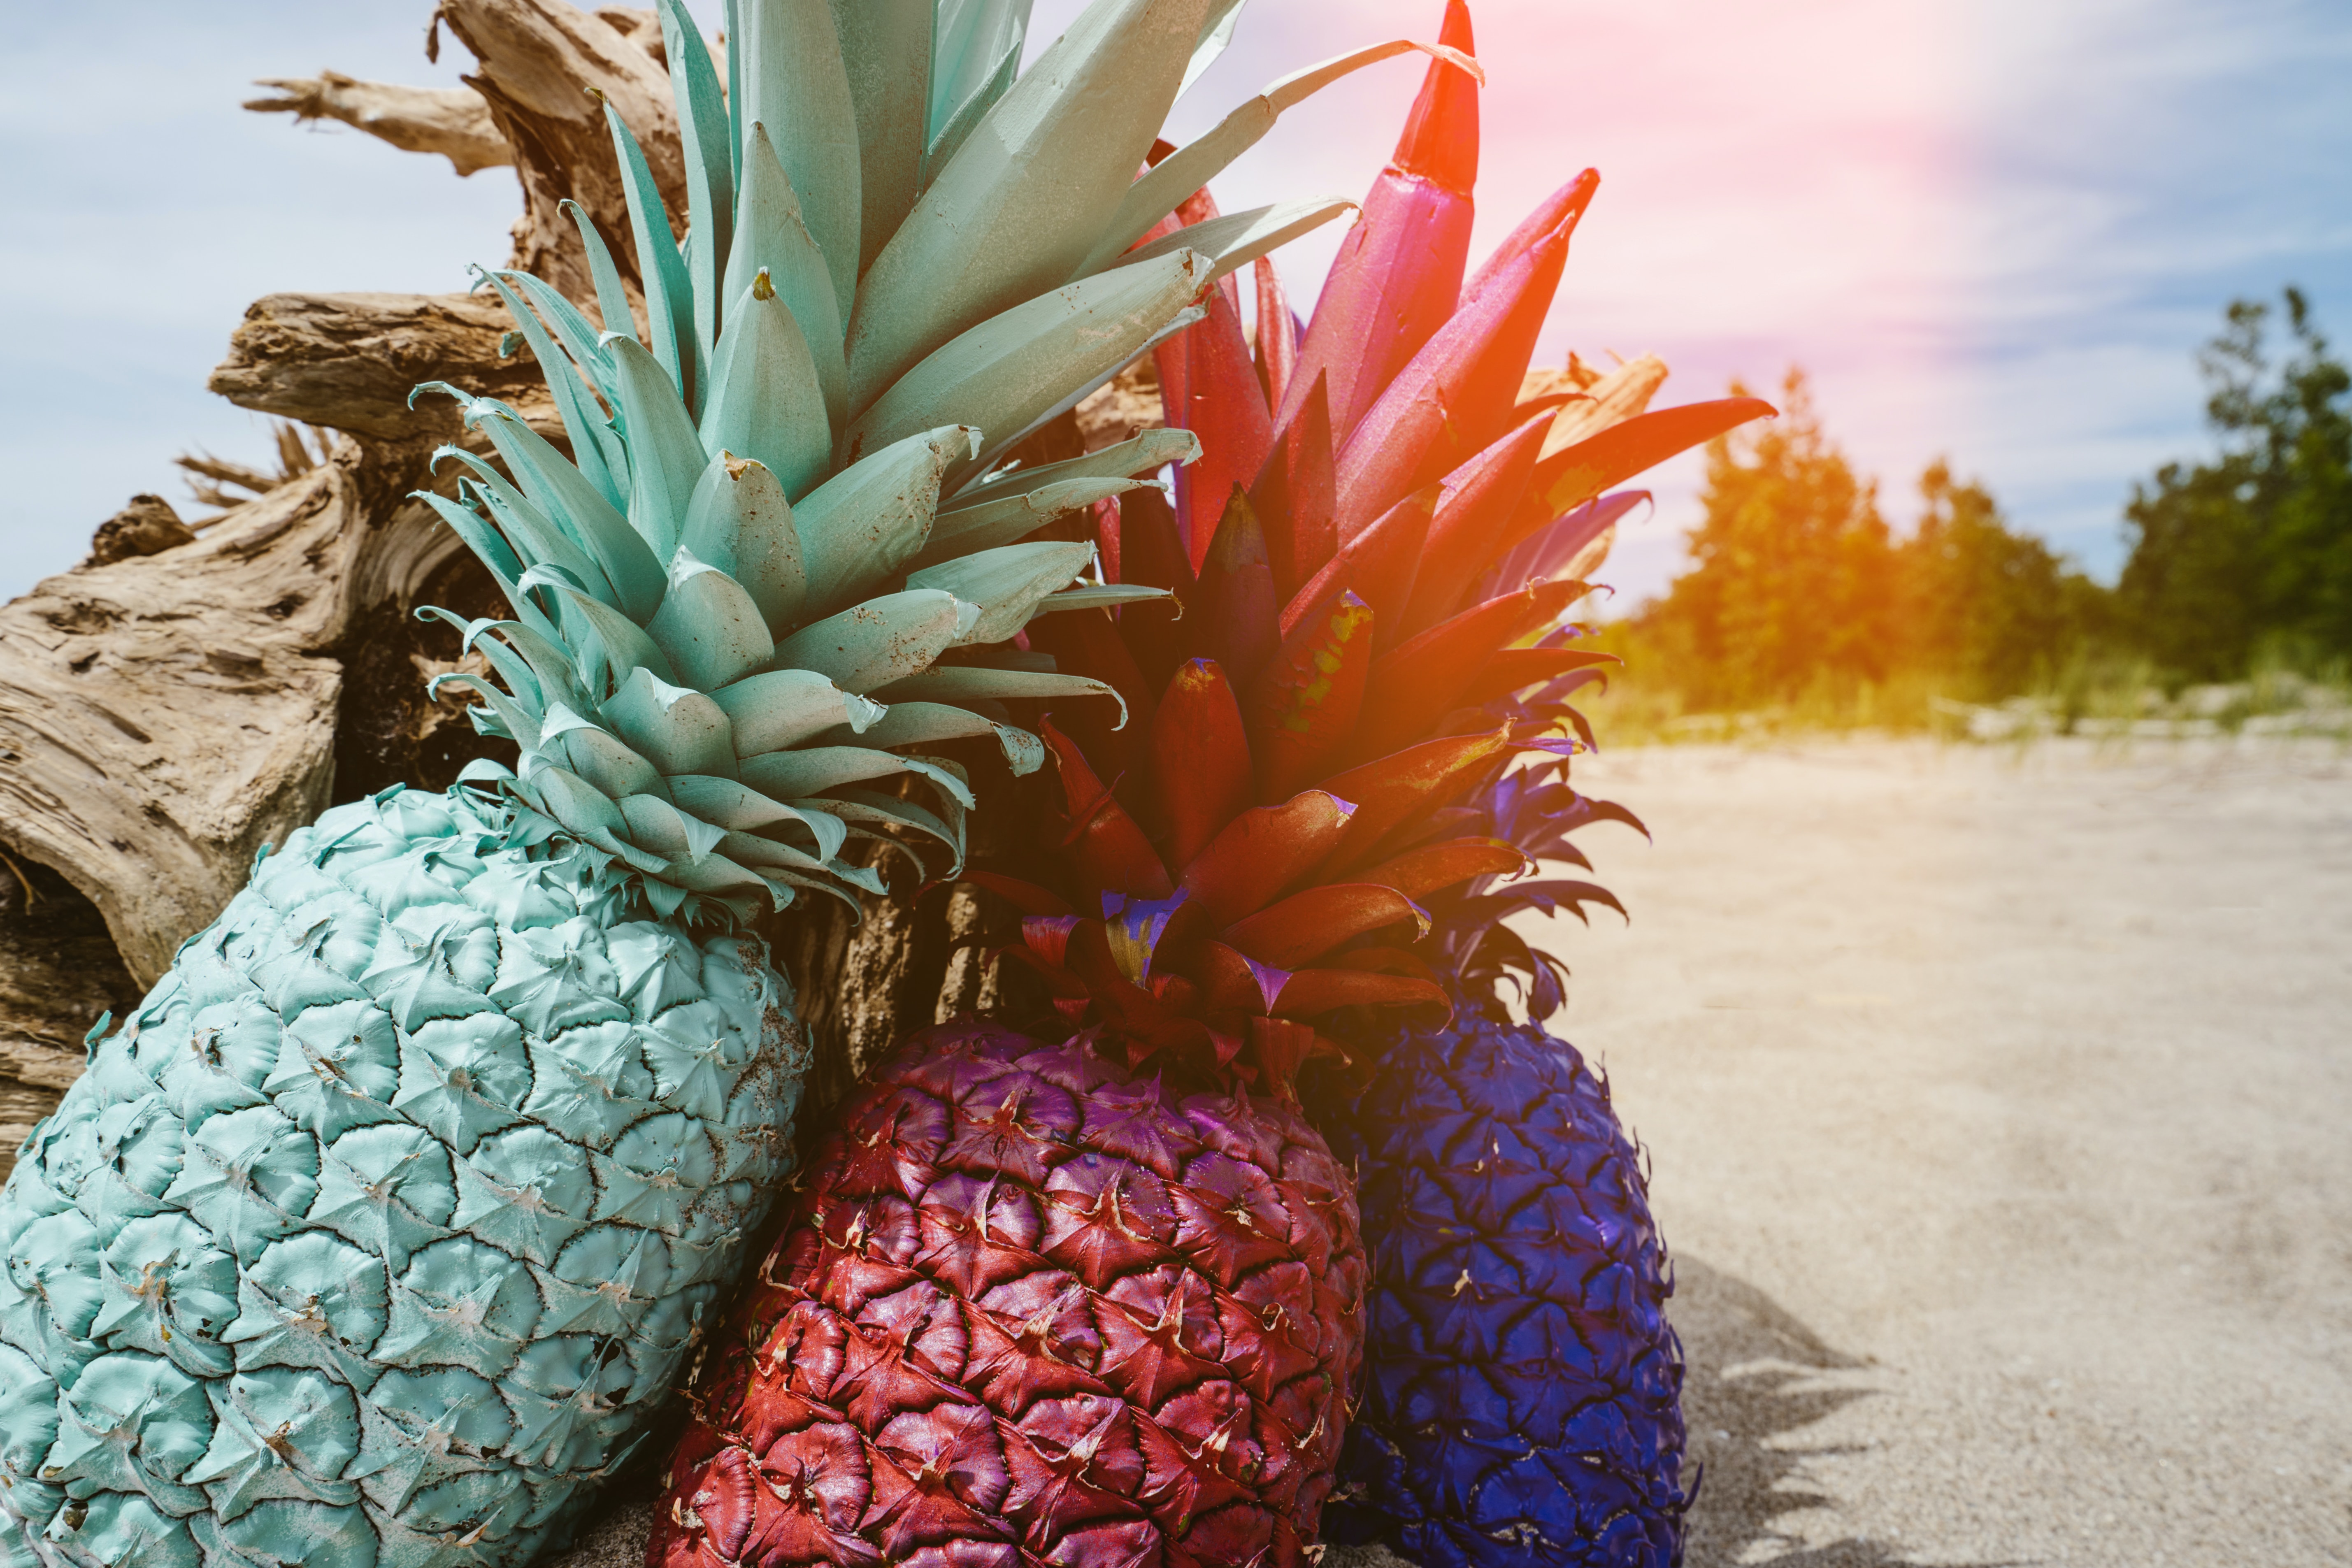 Colored pineapples. | Source: Unsplash